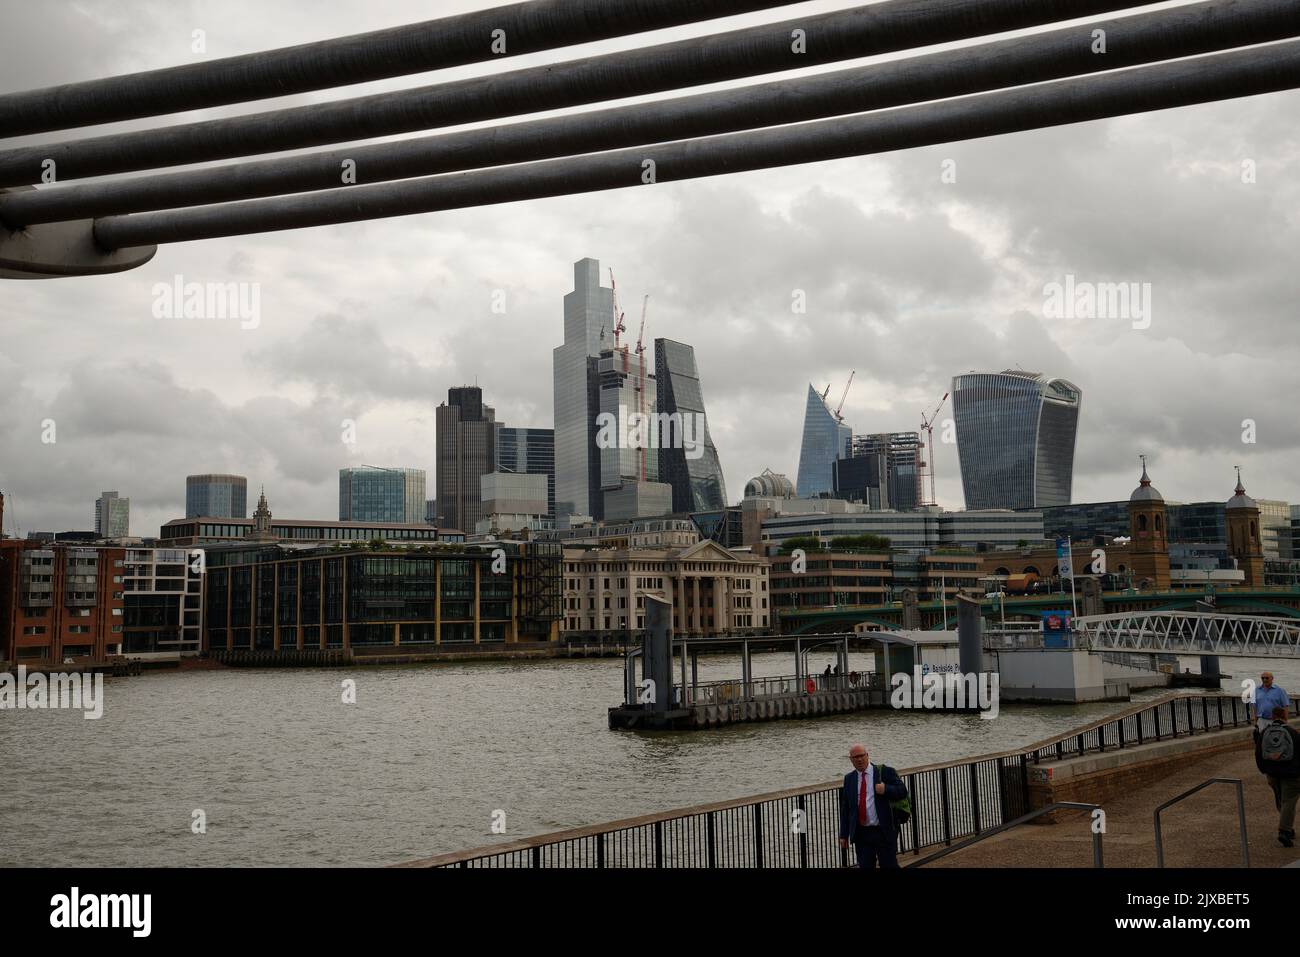 The City of London from the Millennium Bridge. The struts of the bridge framing the view of the City on a grey day. Stock Photo